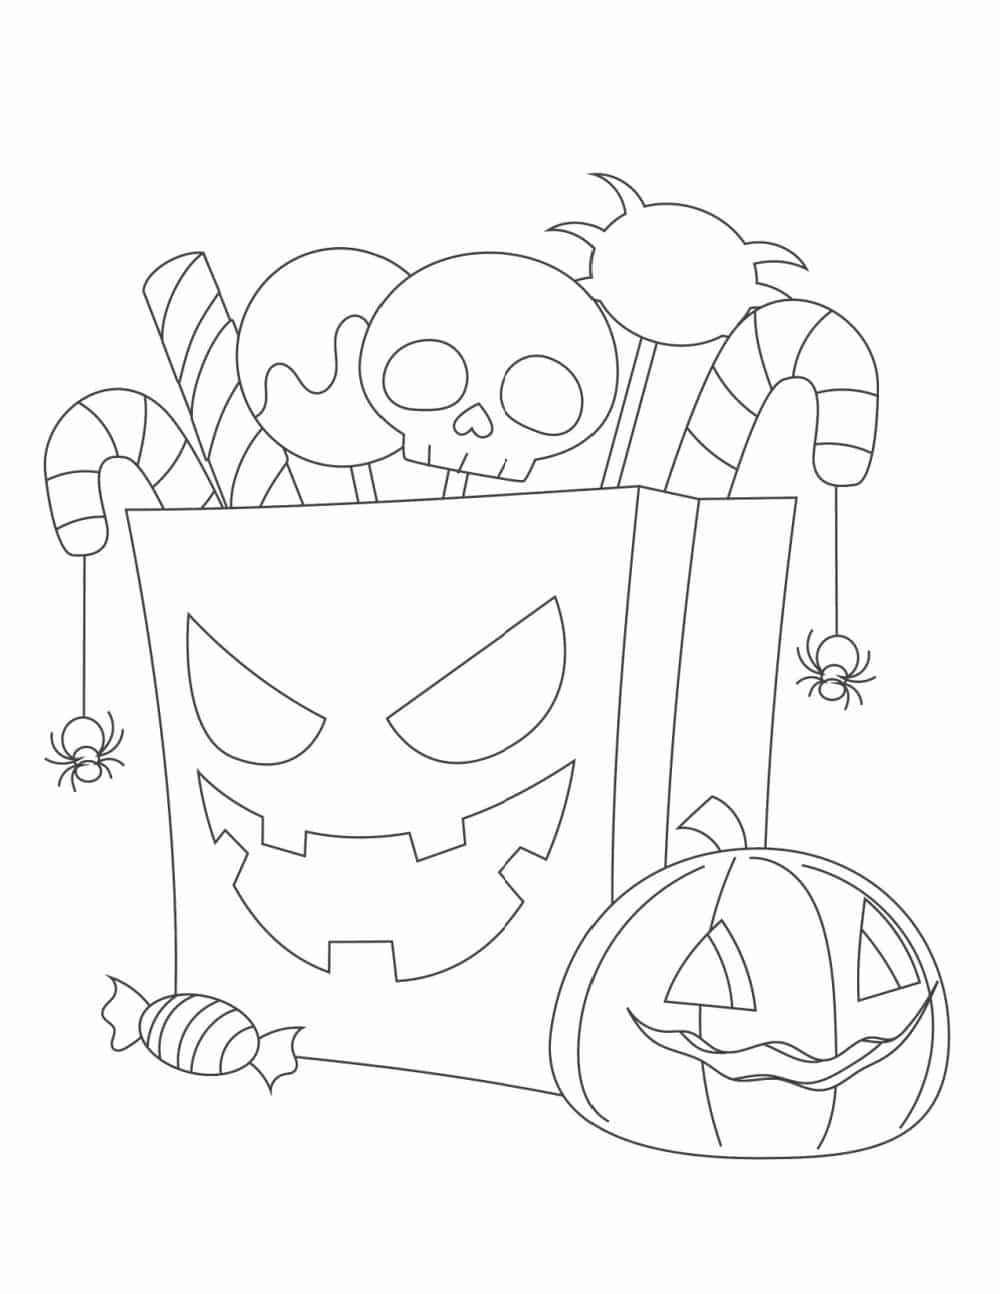 Free easy halloween coloring pages for kids